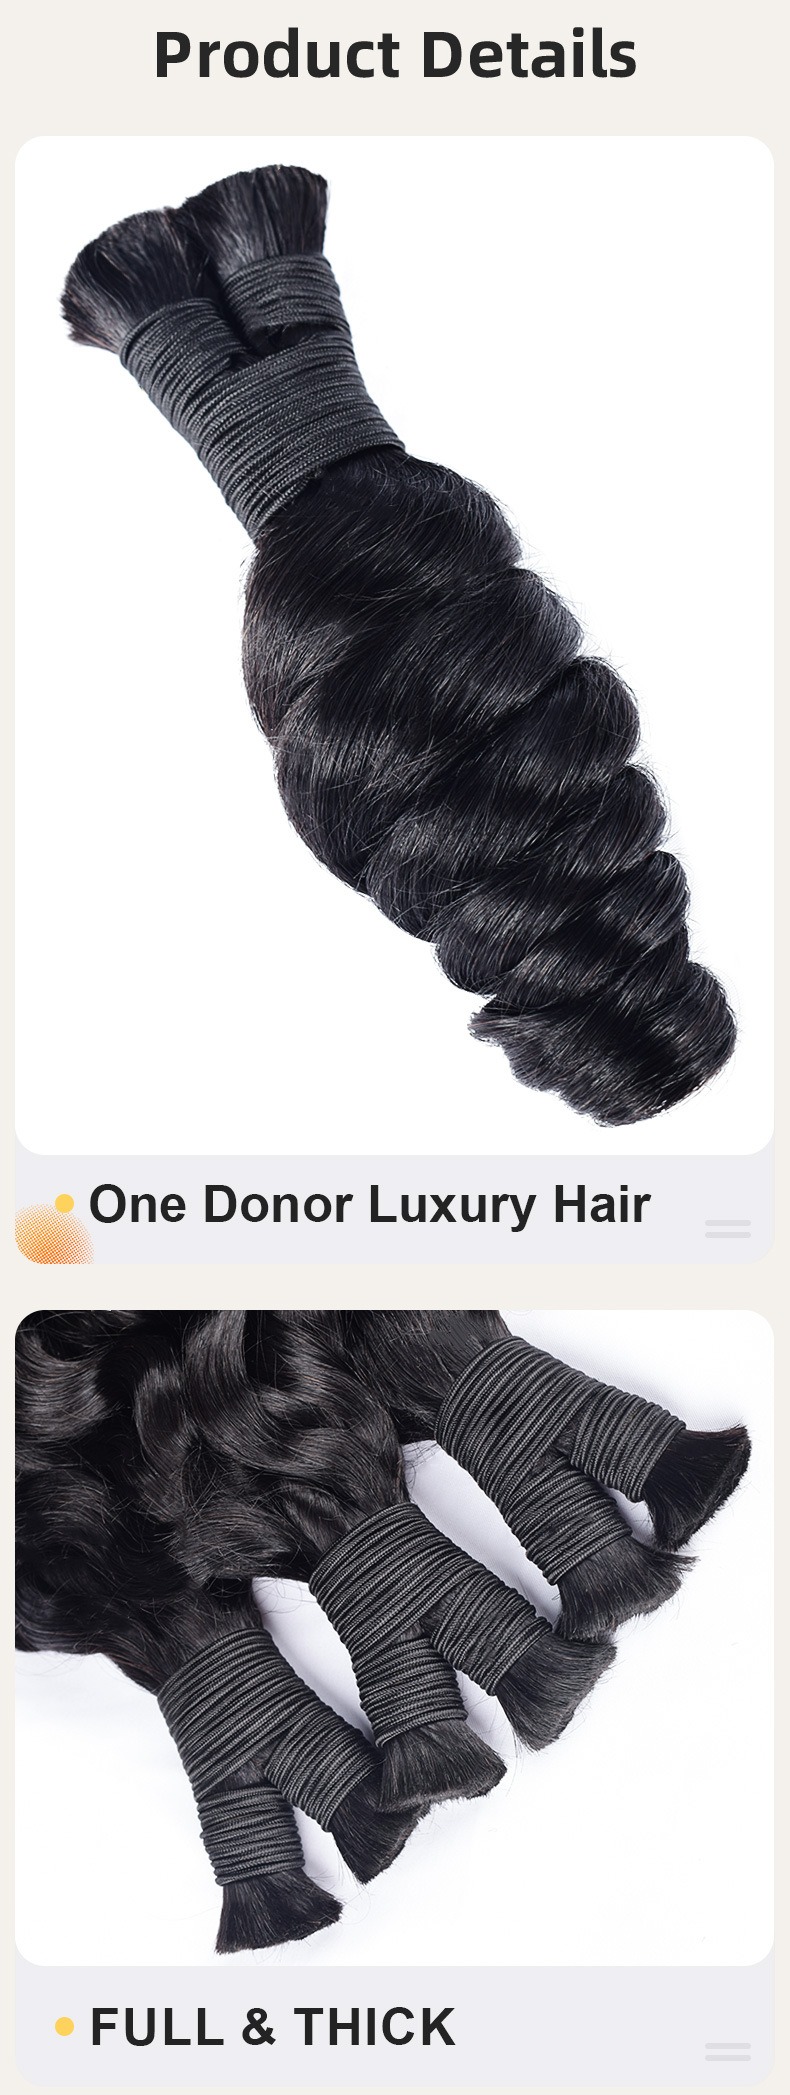 Get beautifully wavy hair with these loose wave human hair extensions, designed for bulk hair